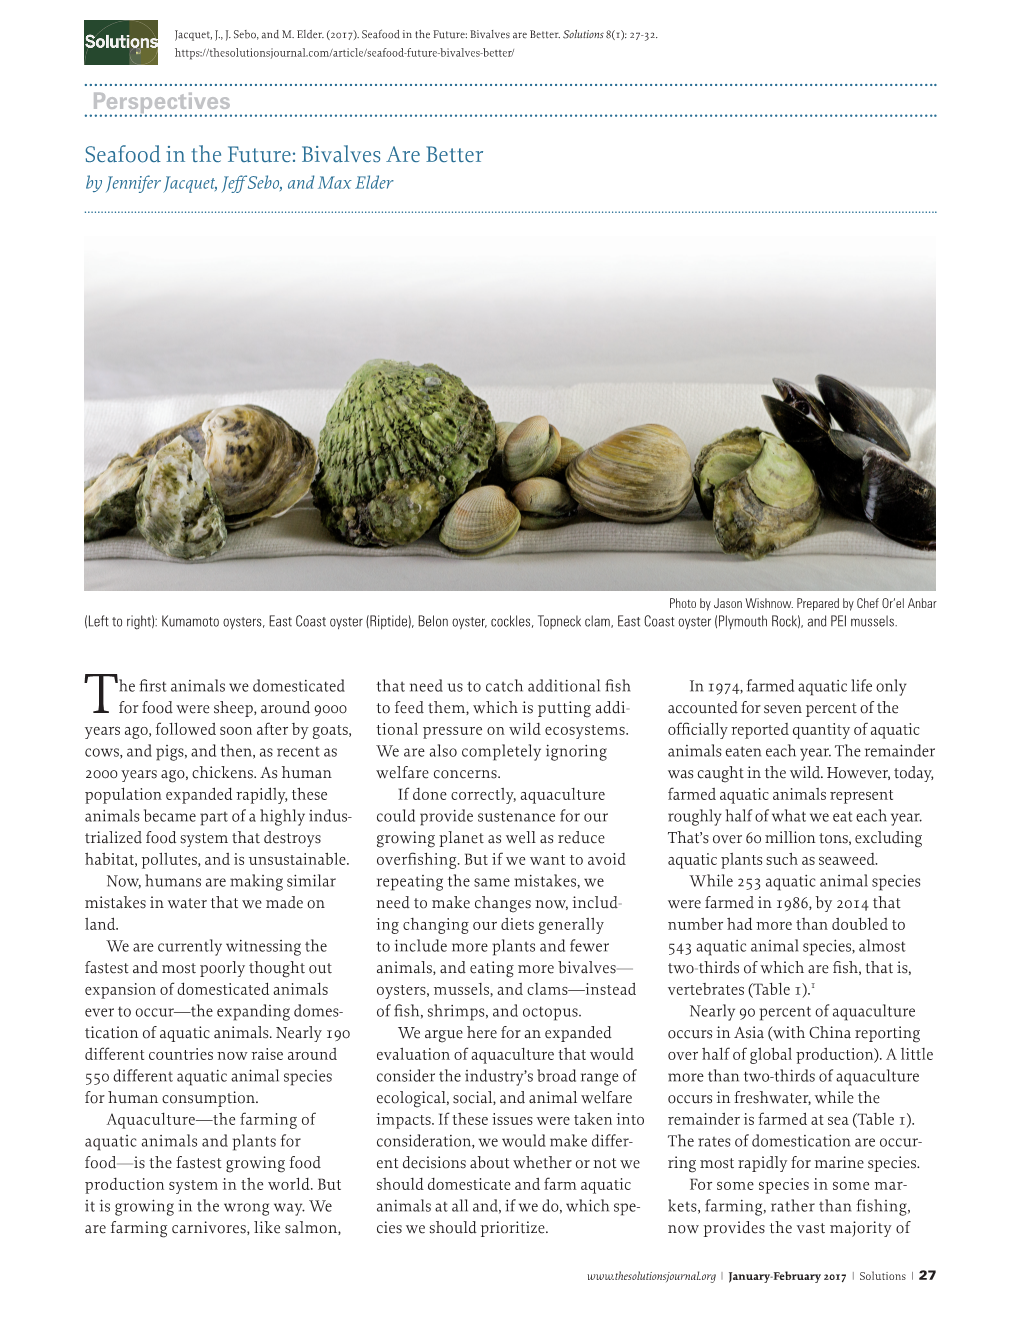 Perspectives Seafood in the Future: Bivalves Are Better